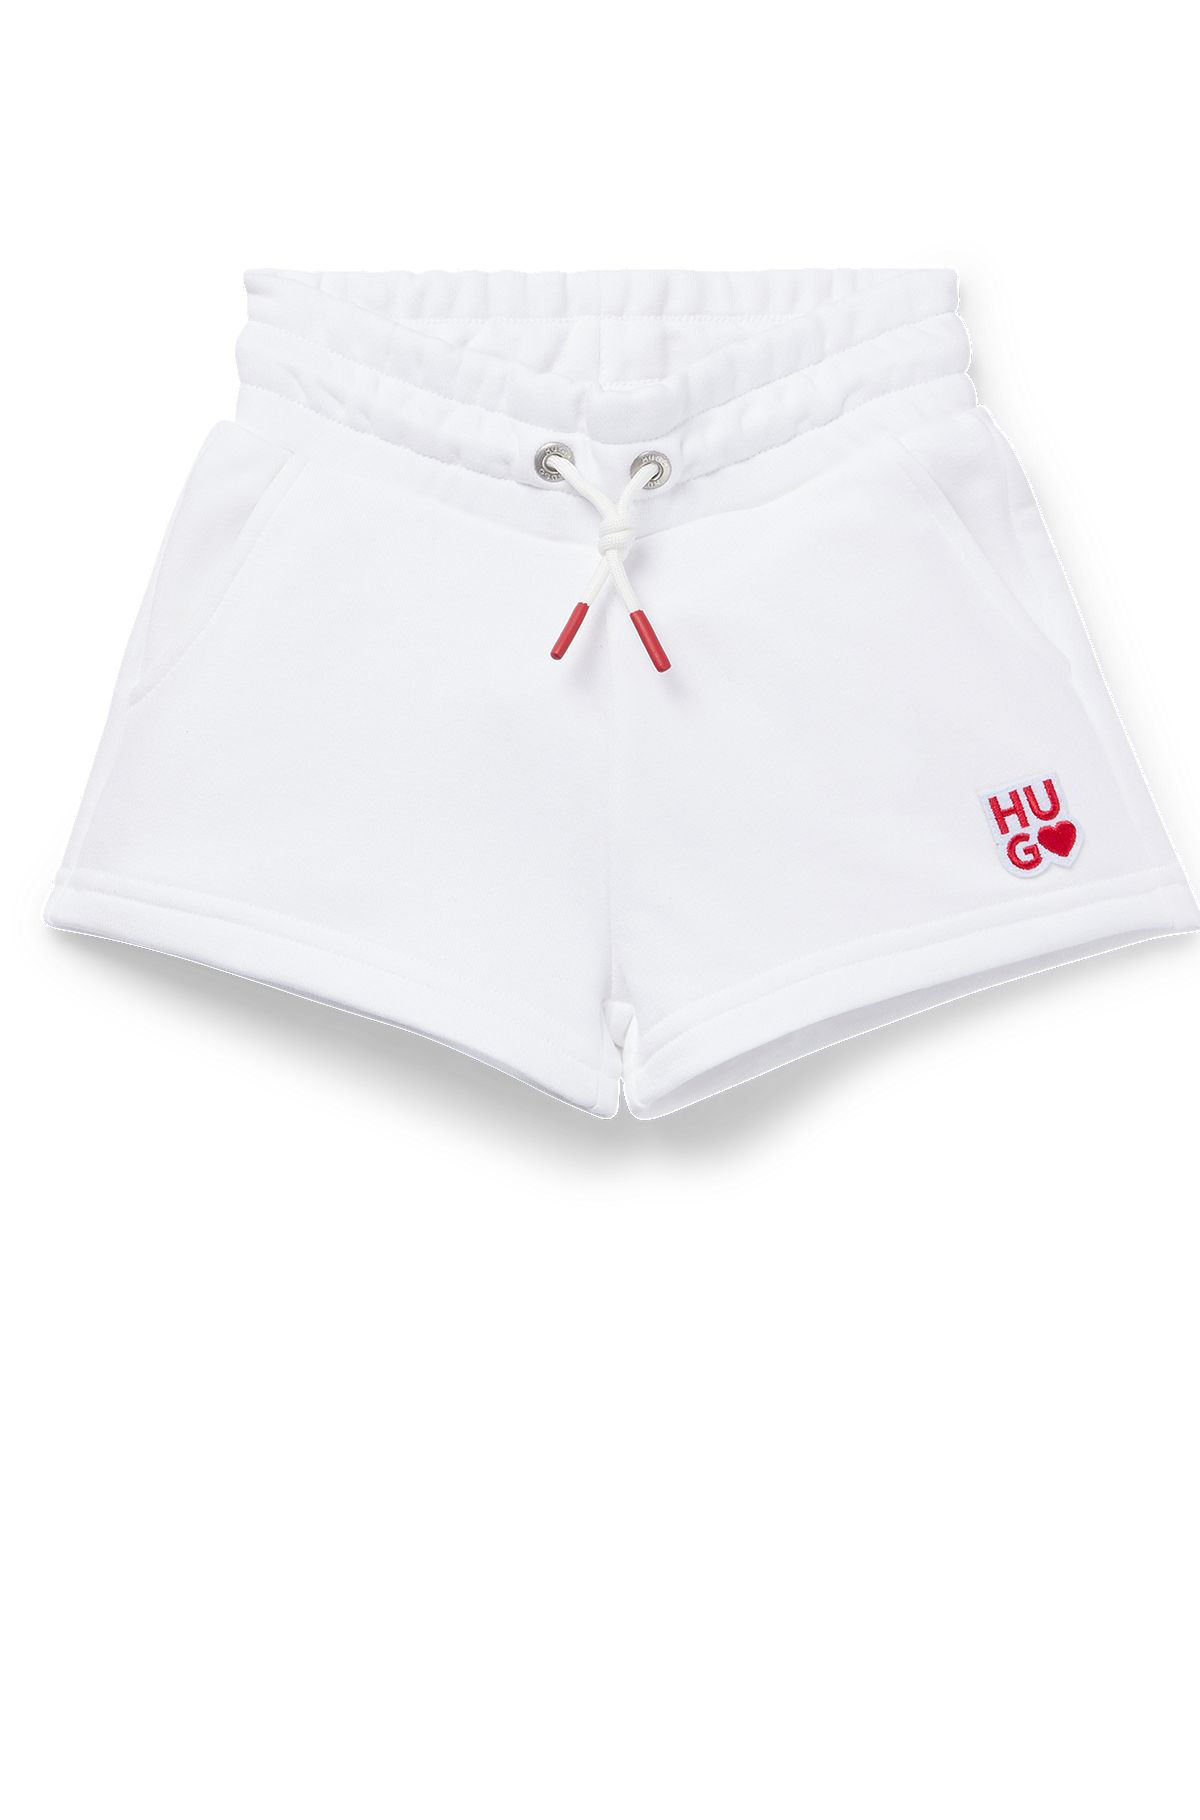 Kids' shorts in French terry with logo details, White